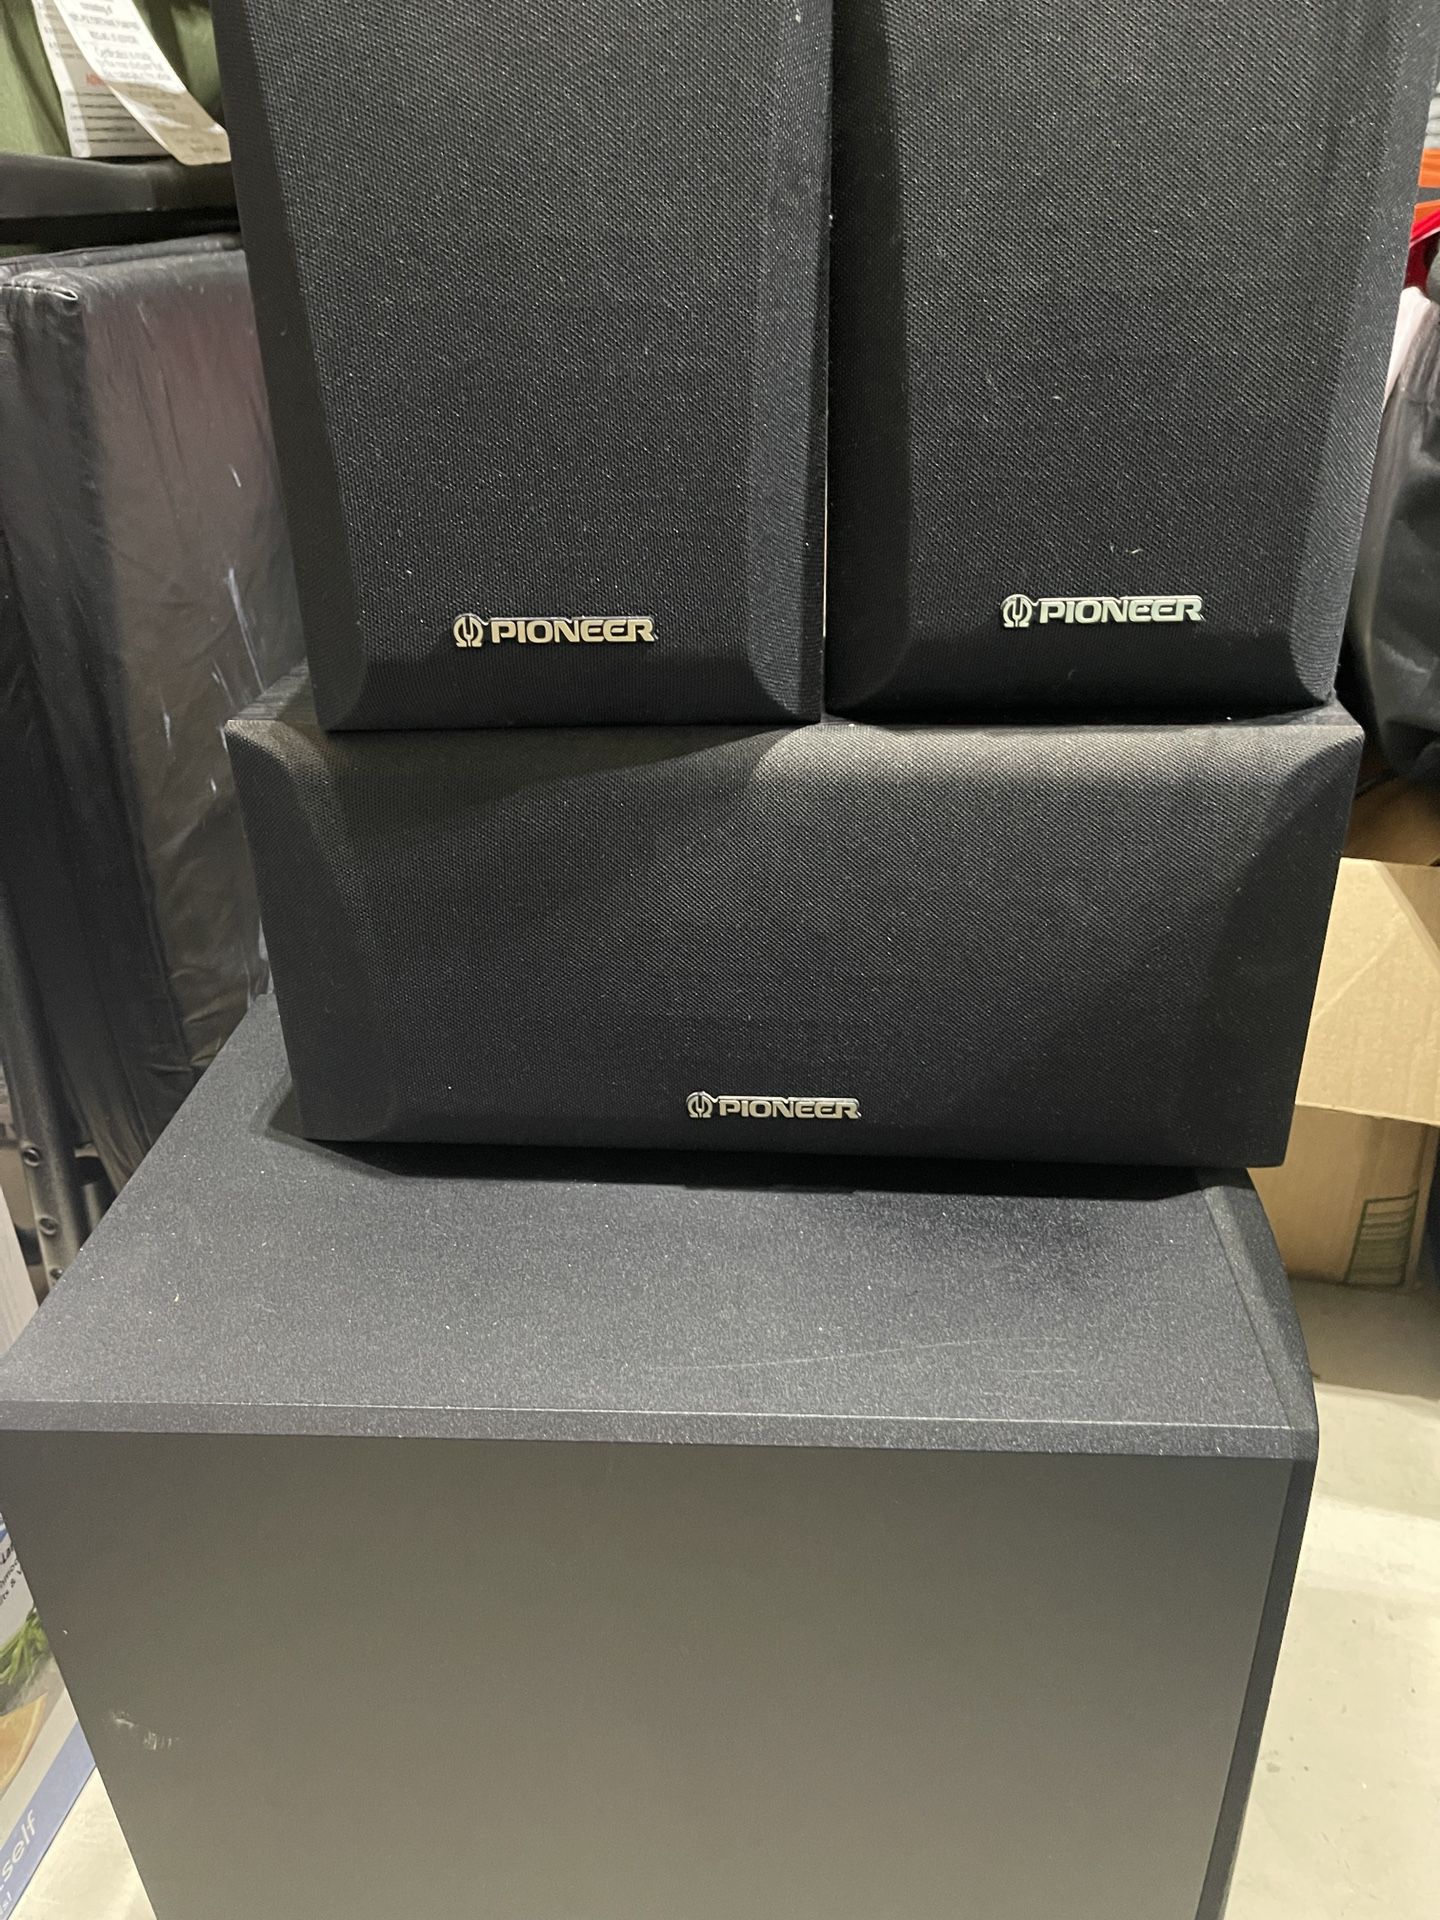 3 Spearker Surround Sound with subwoofer, receiver, and Much More